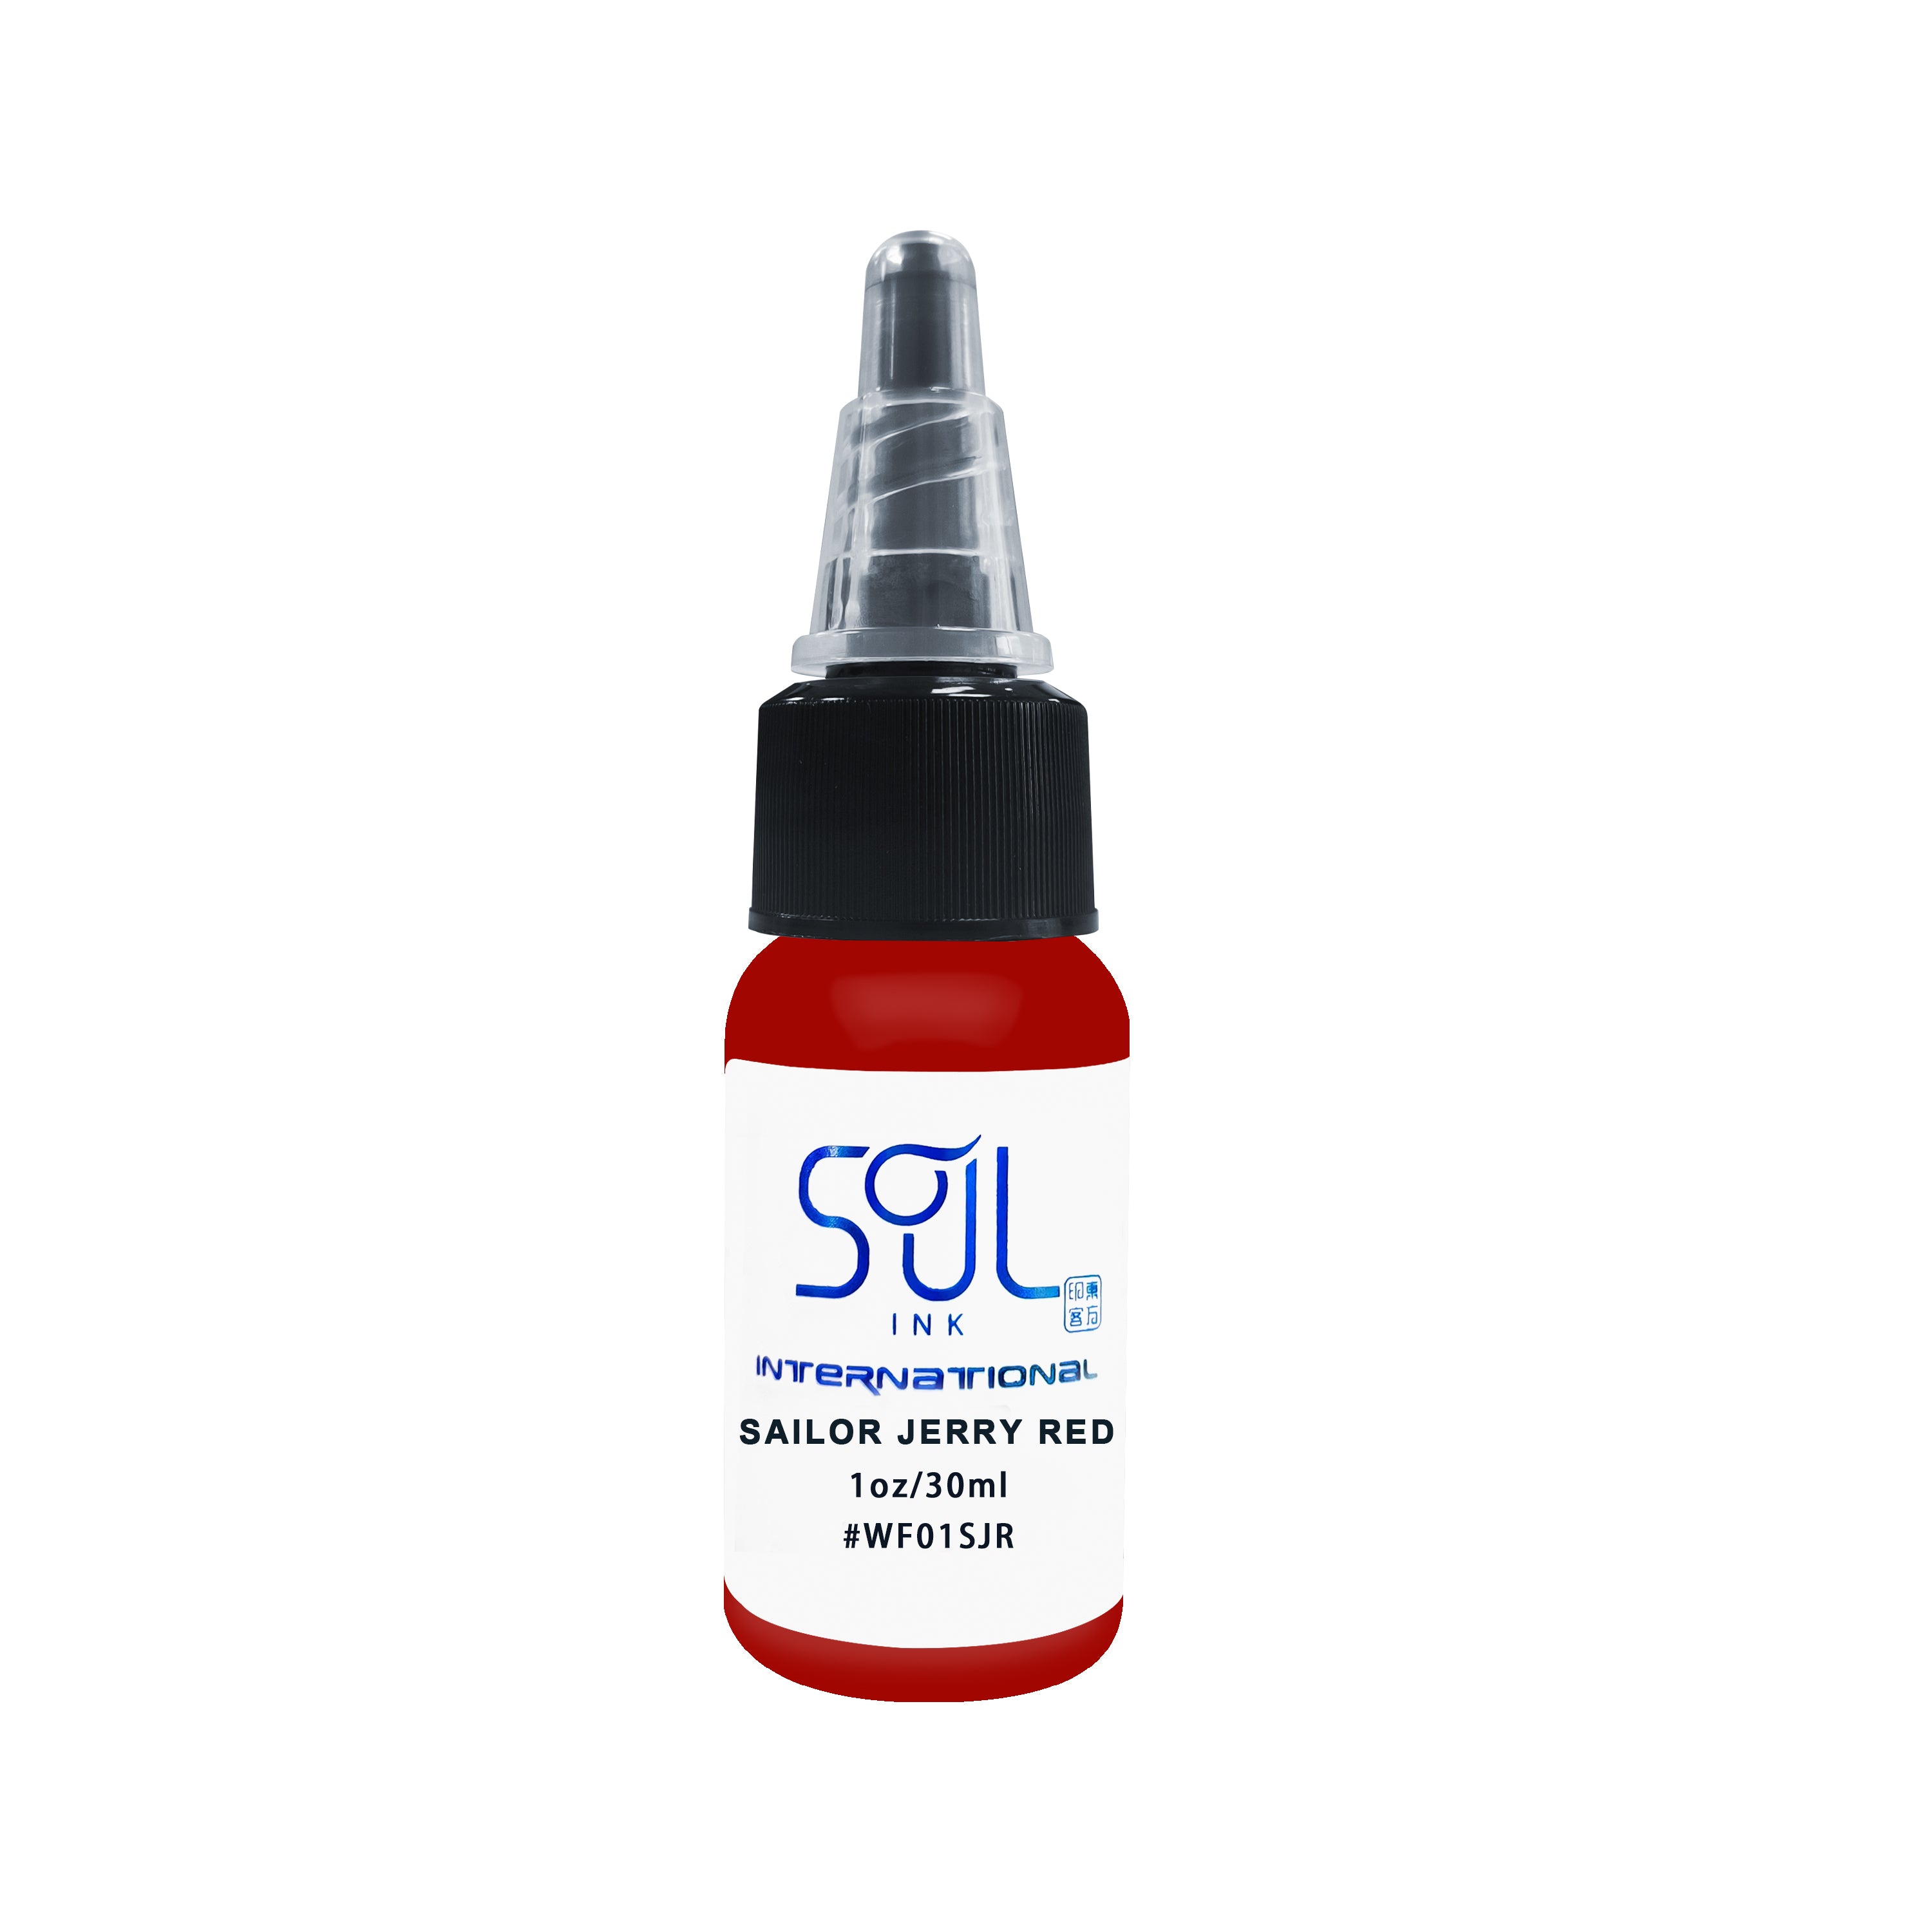 Photograph of a bottle of 'Soul Ink' brand sailor jerry red ink. The label prominently displays the brand name 'Soul Ink' in stylish blue typography against a white background. The sailor jerry red 30 ml bottle with a white label featuring the brands name 'Soul Ink'.